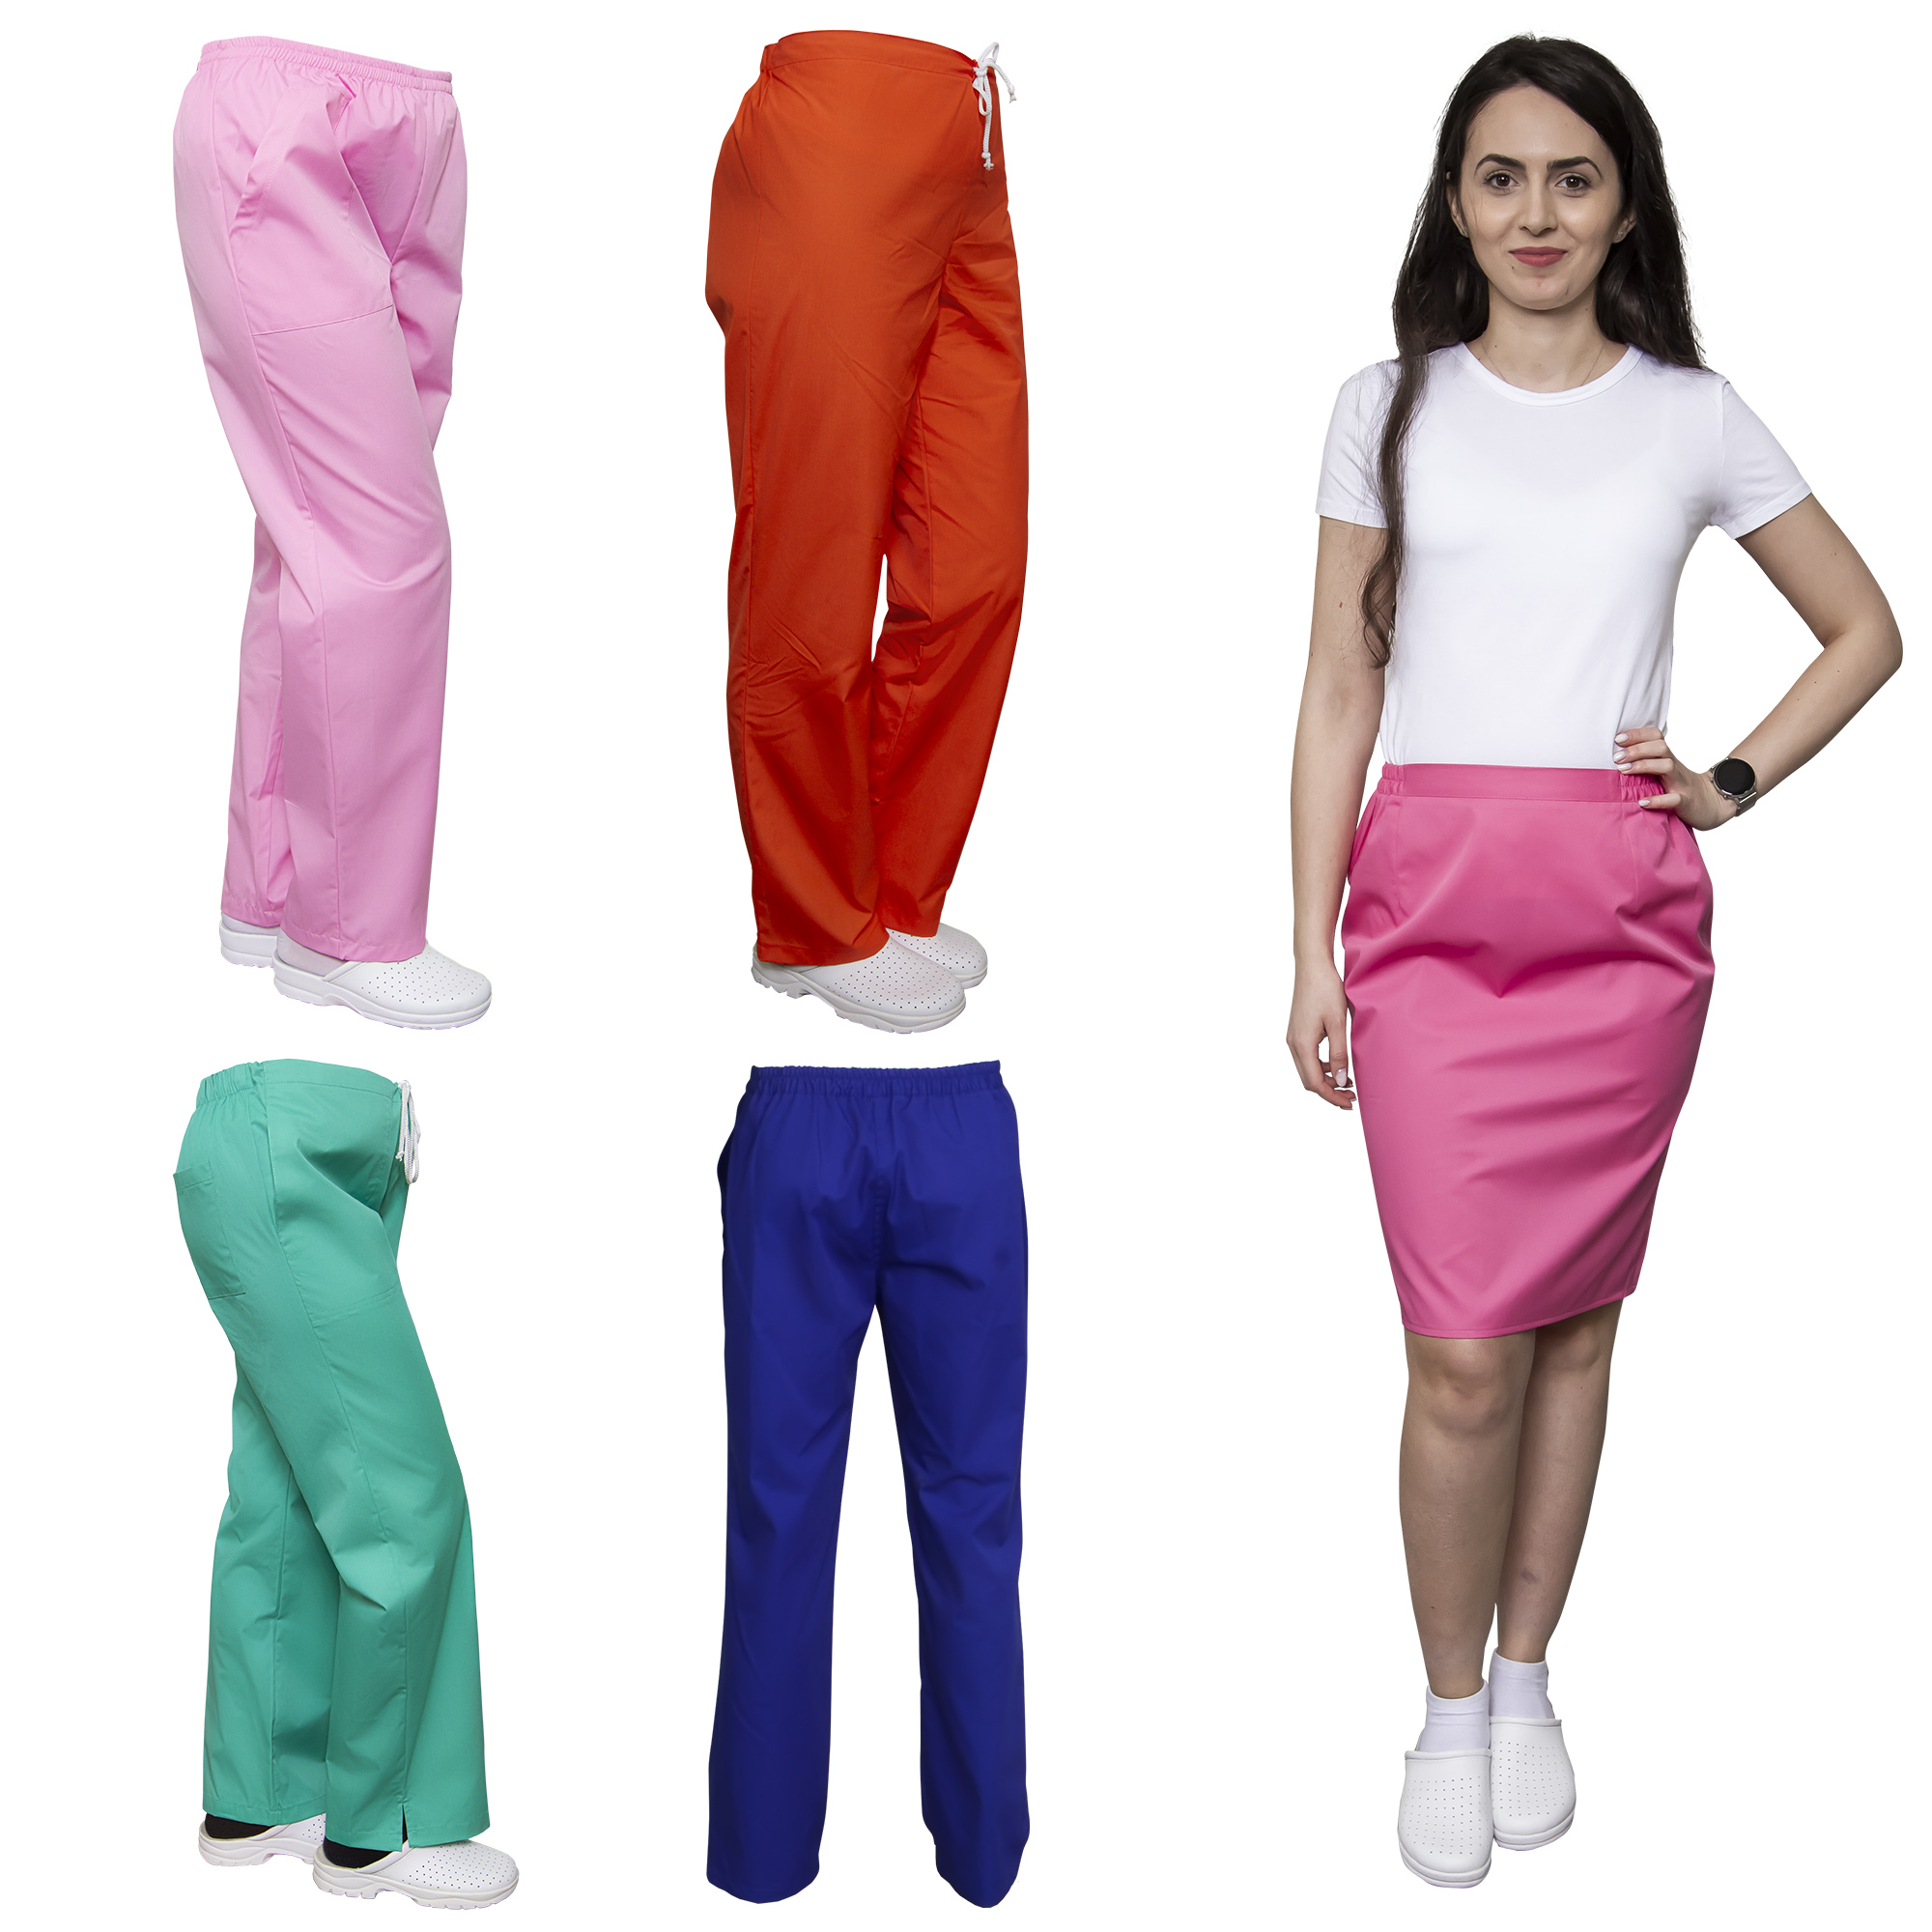 Work Uniforms/PROFESSIONAL UNIFORMS/Skirts and Trousers